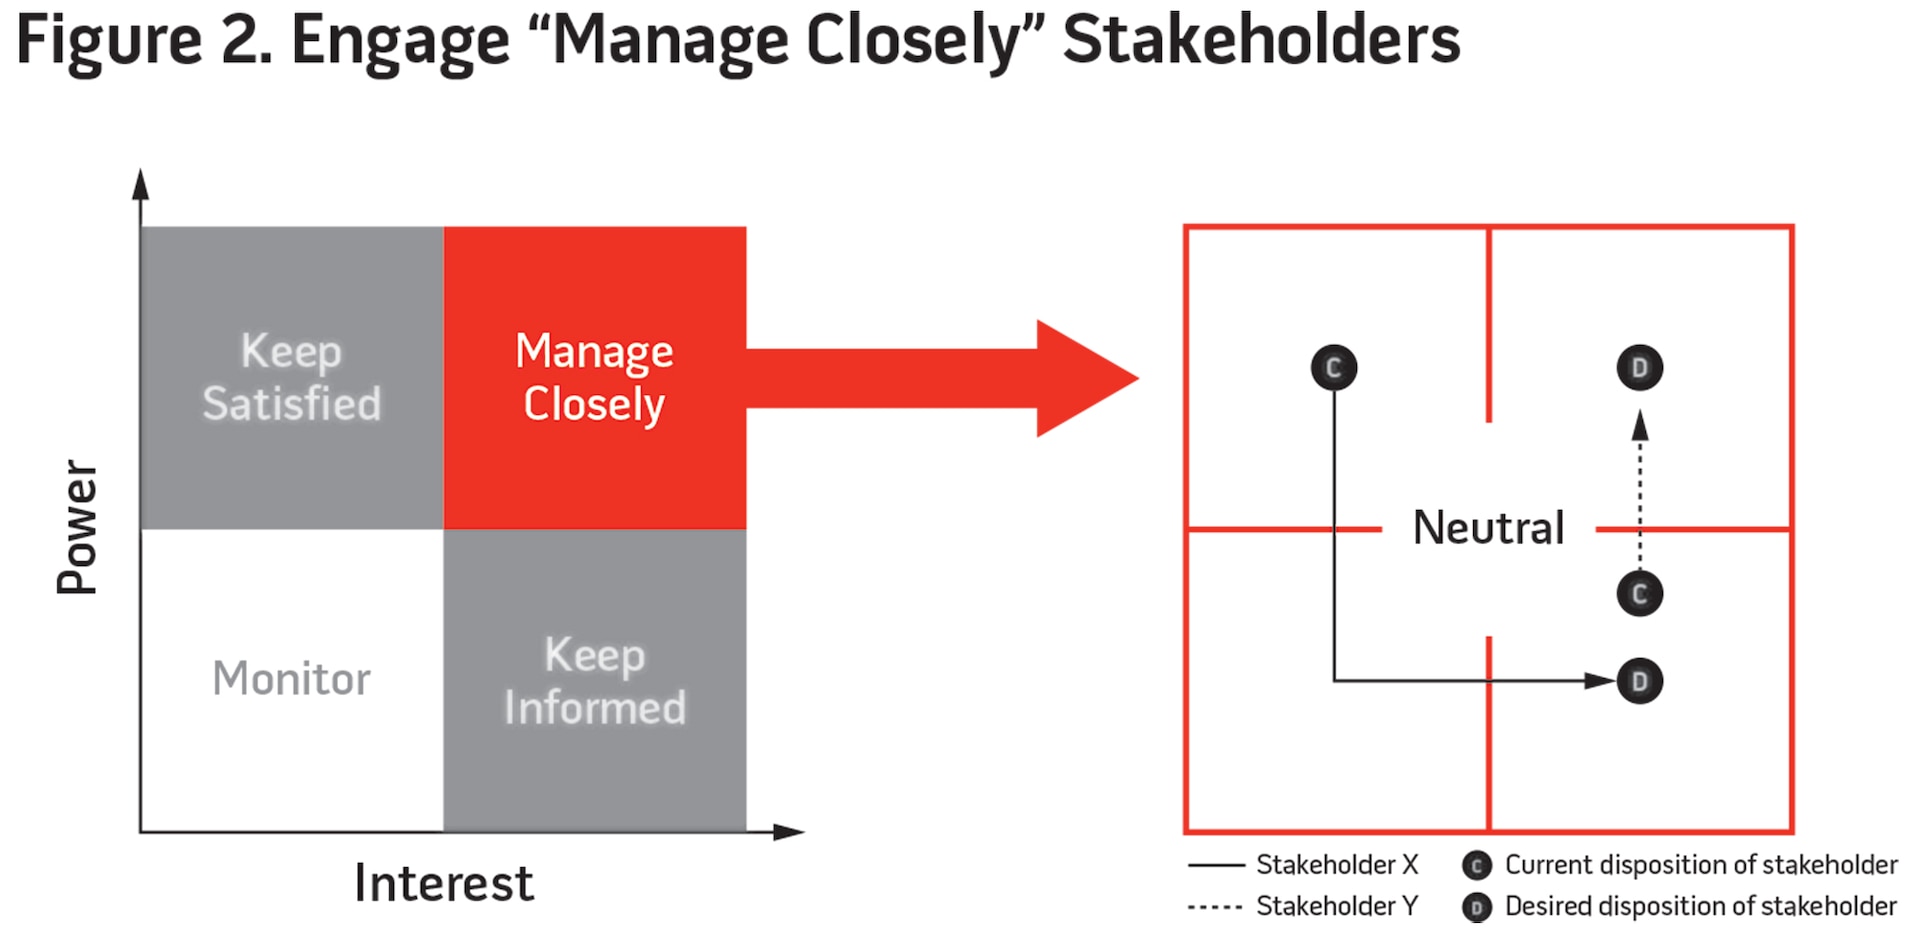 Figure 2. Engage “Manage Closely” Stakeholders